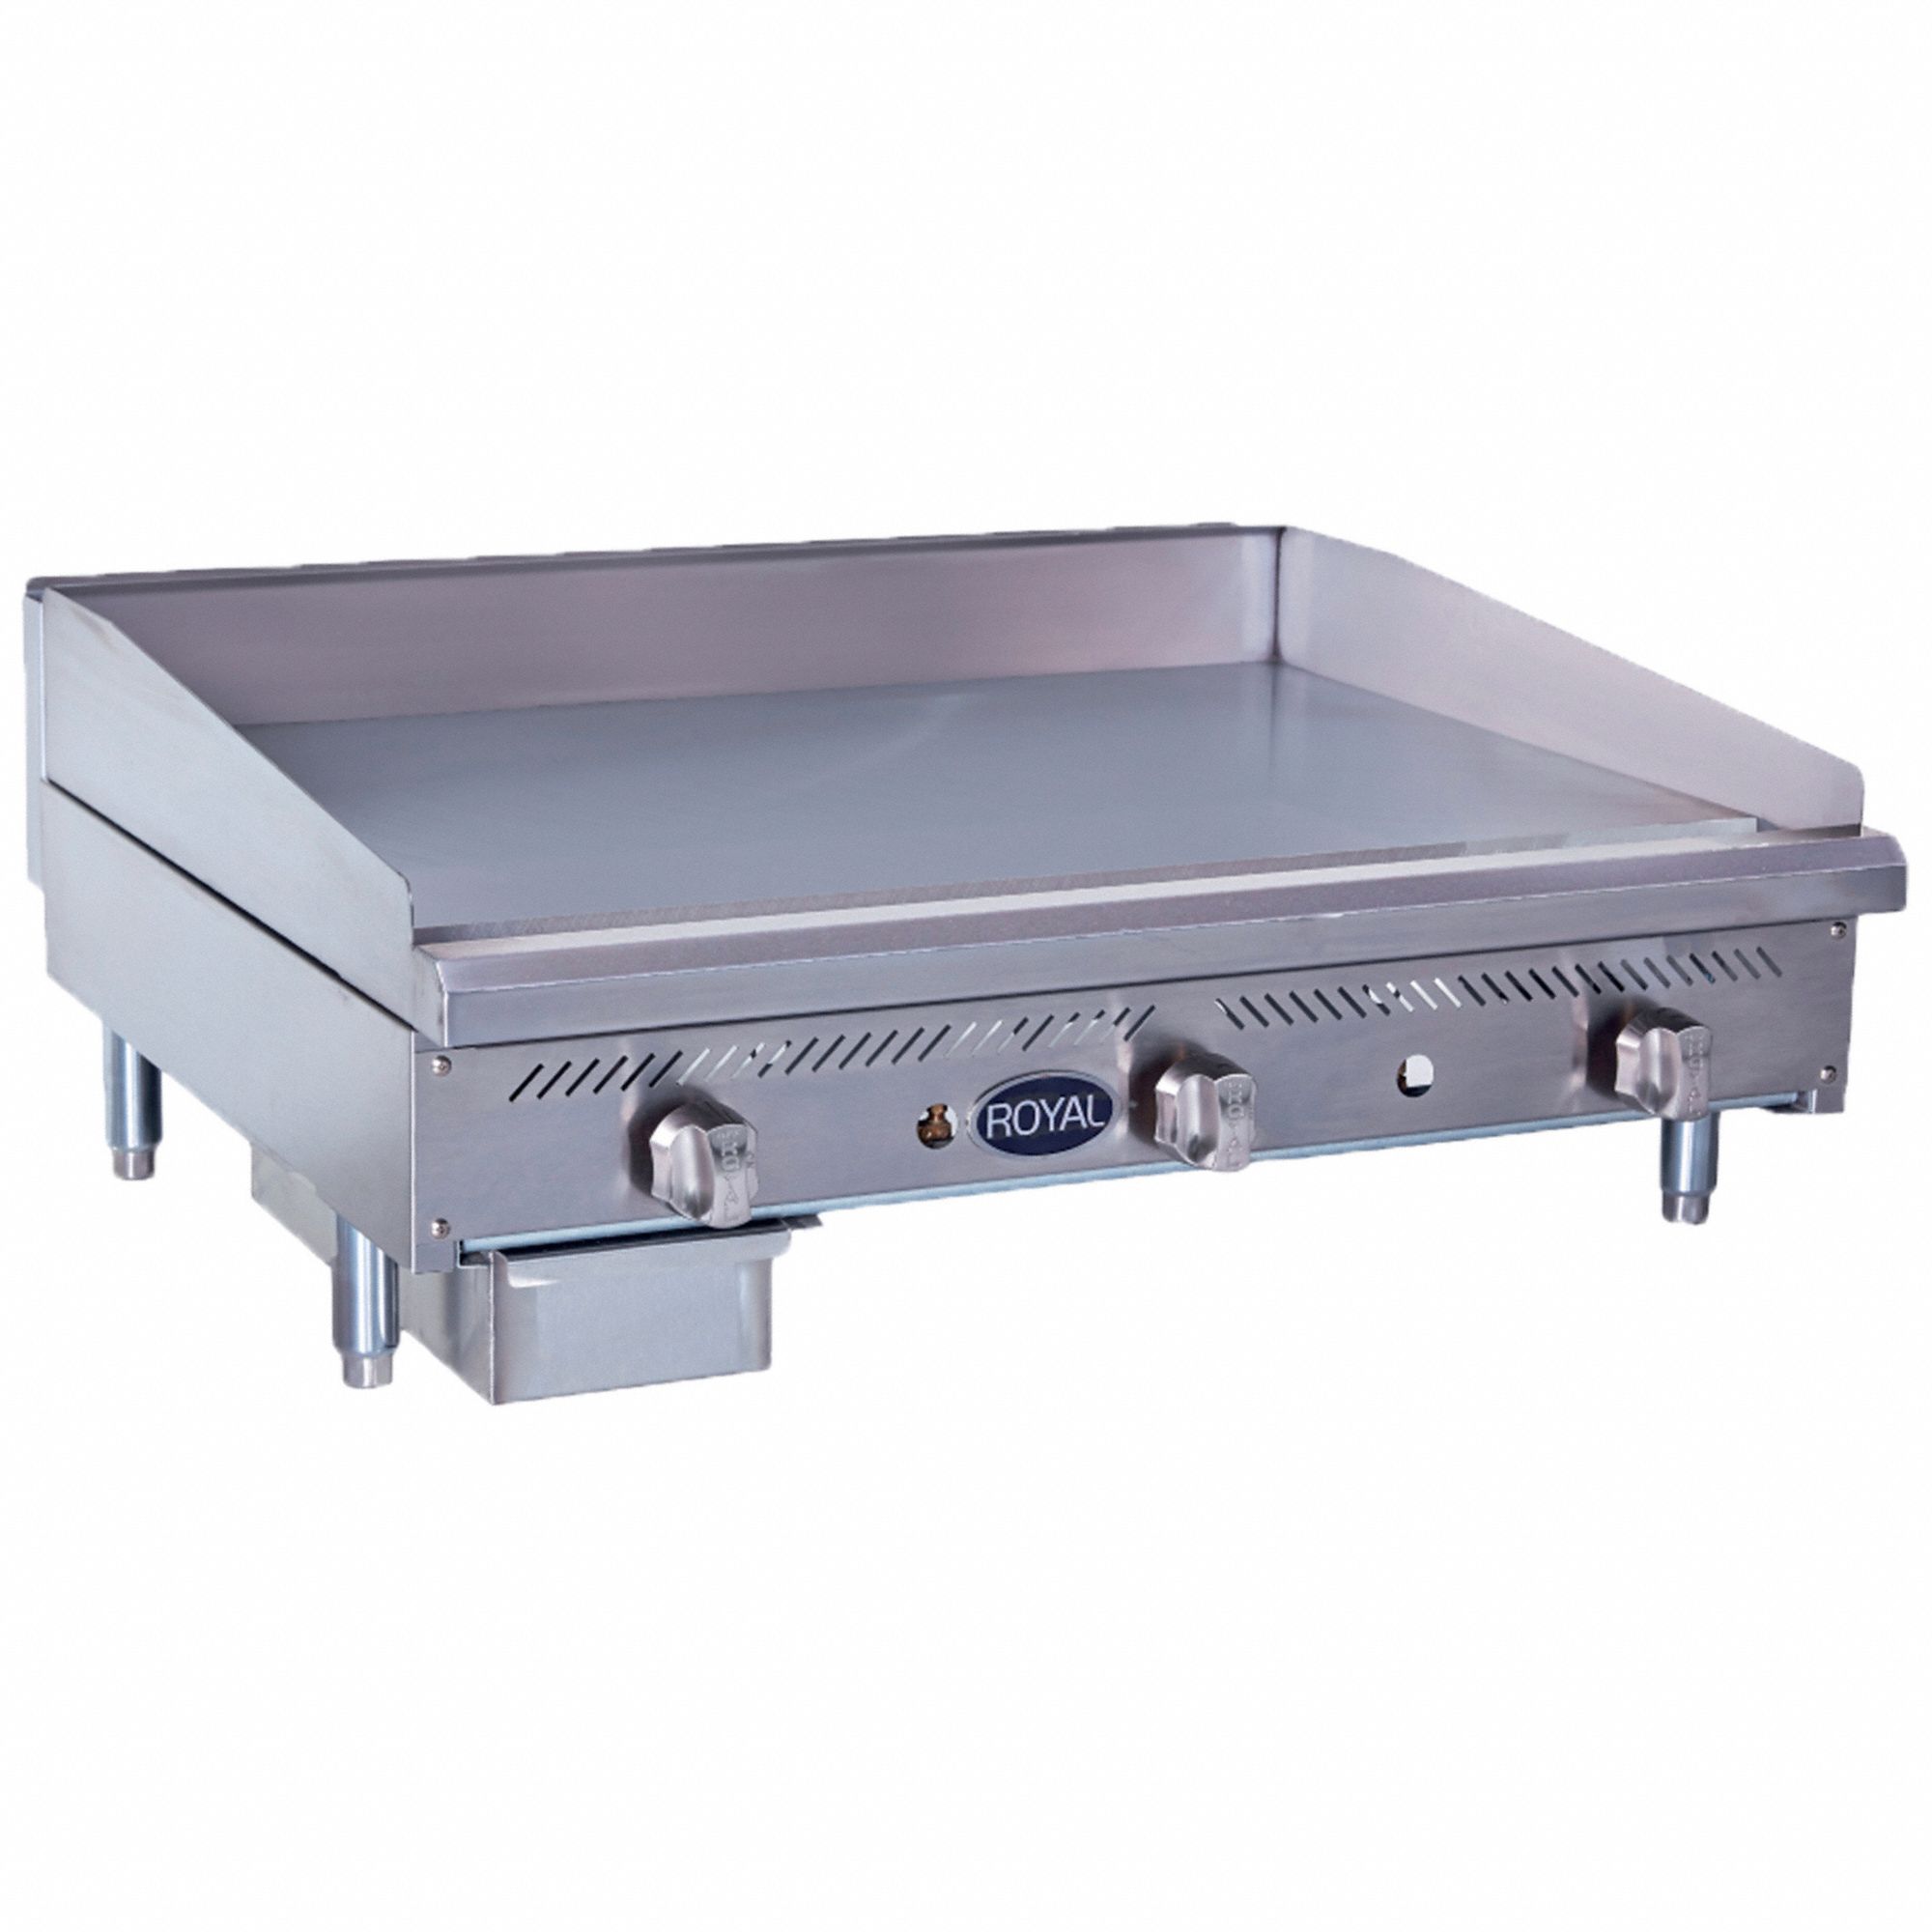 Manual Gas Griddle: Gas, Manual, 23 7/8 in x 24 in Cooking Surface